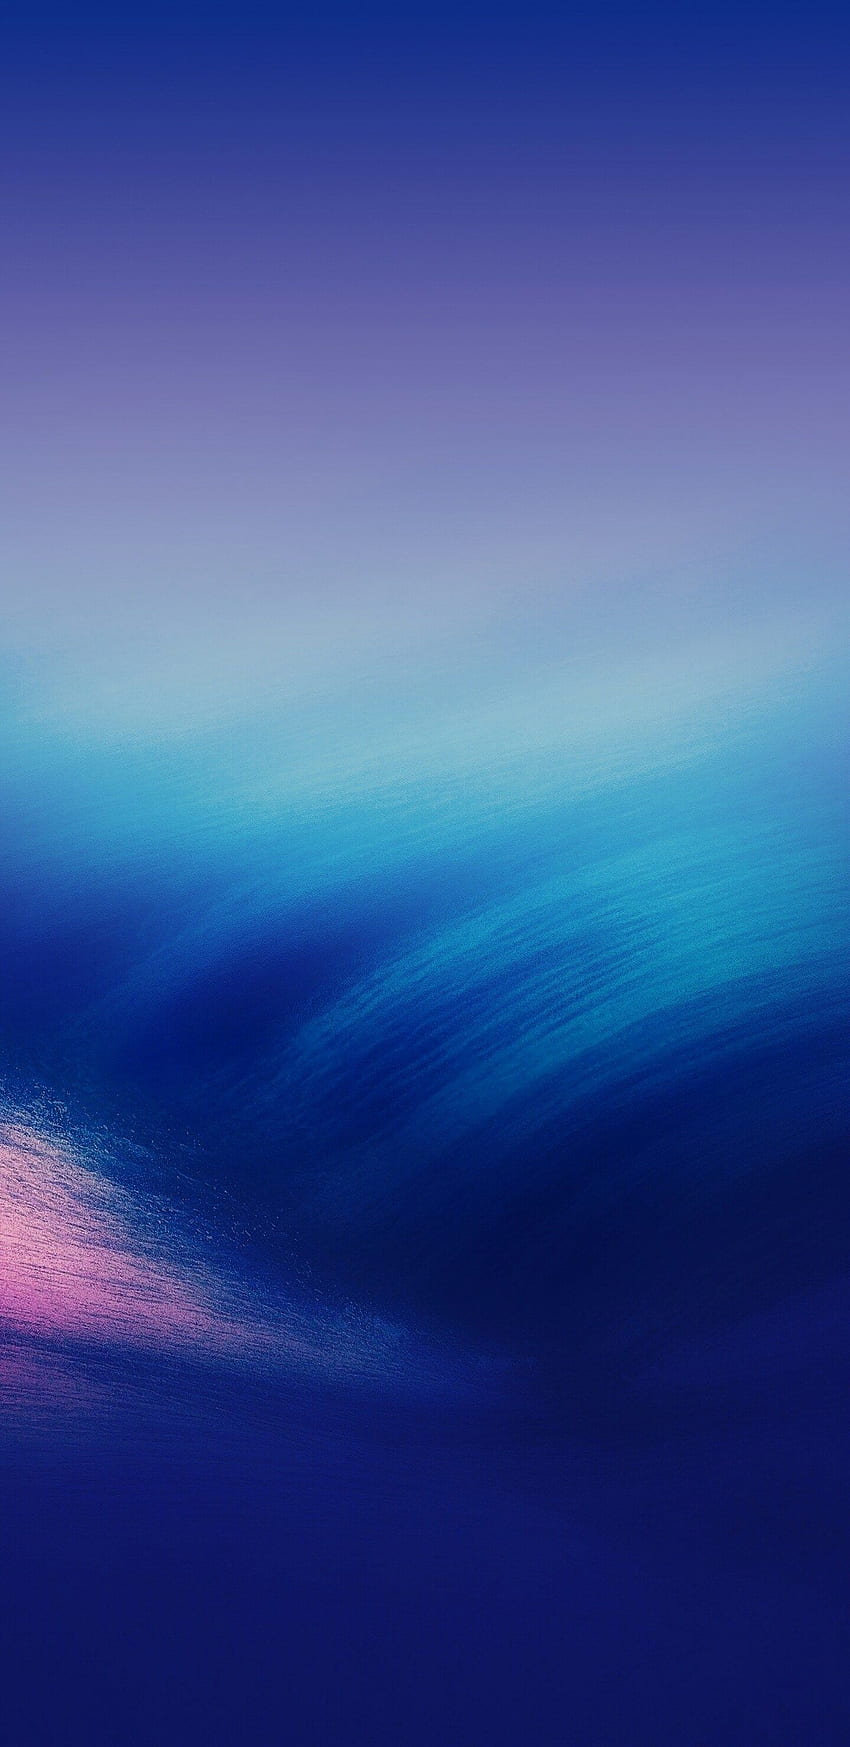 Samsung Galaxy S10 Blue Stock Wallpapers | HD Wallpapers | ID #27690